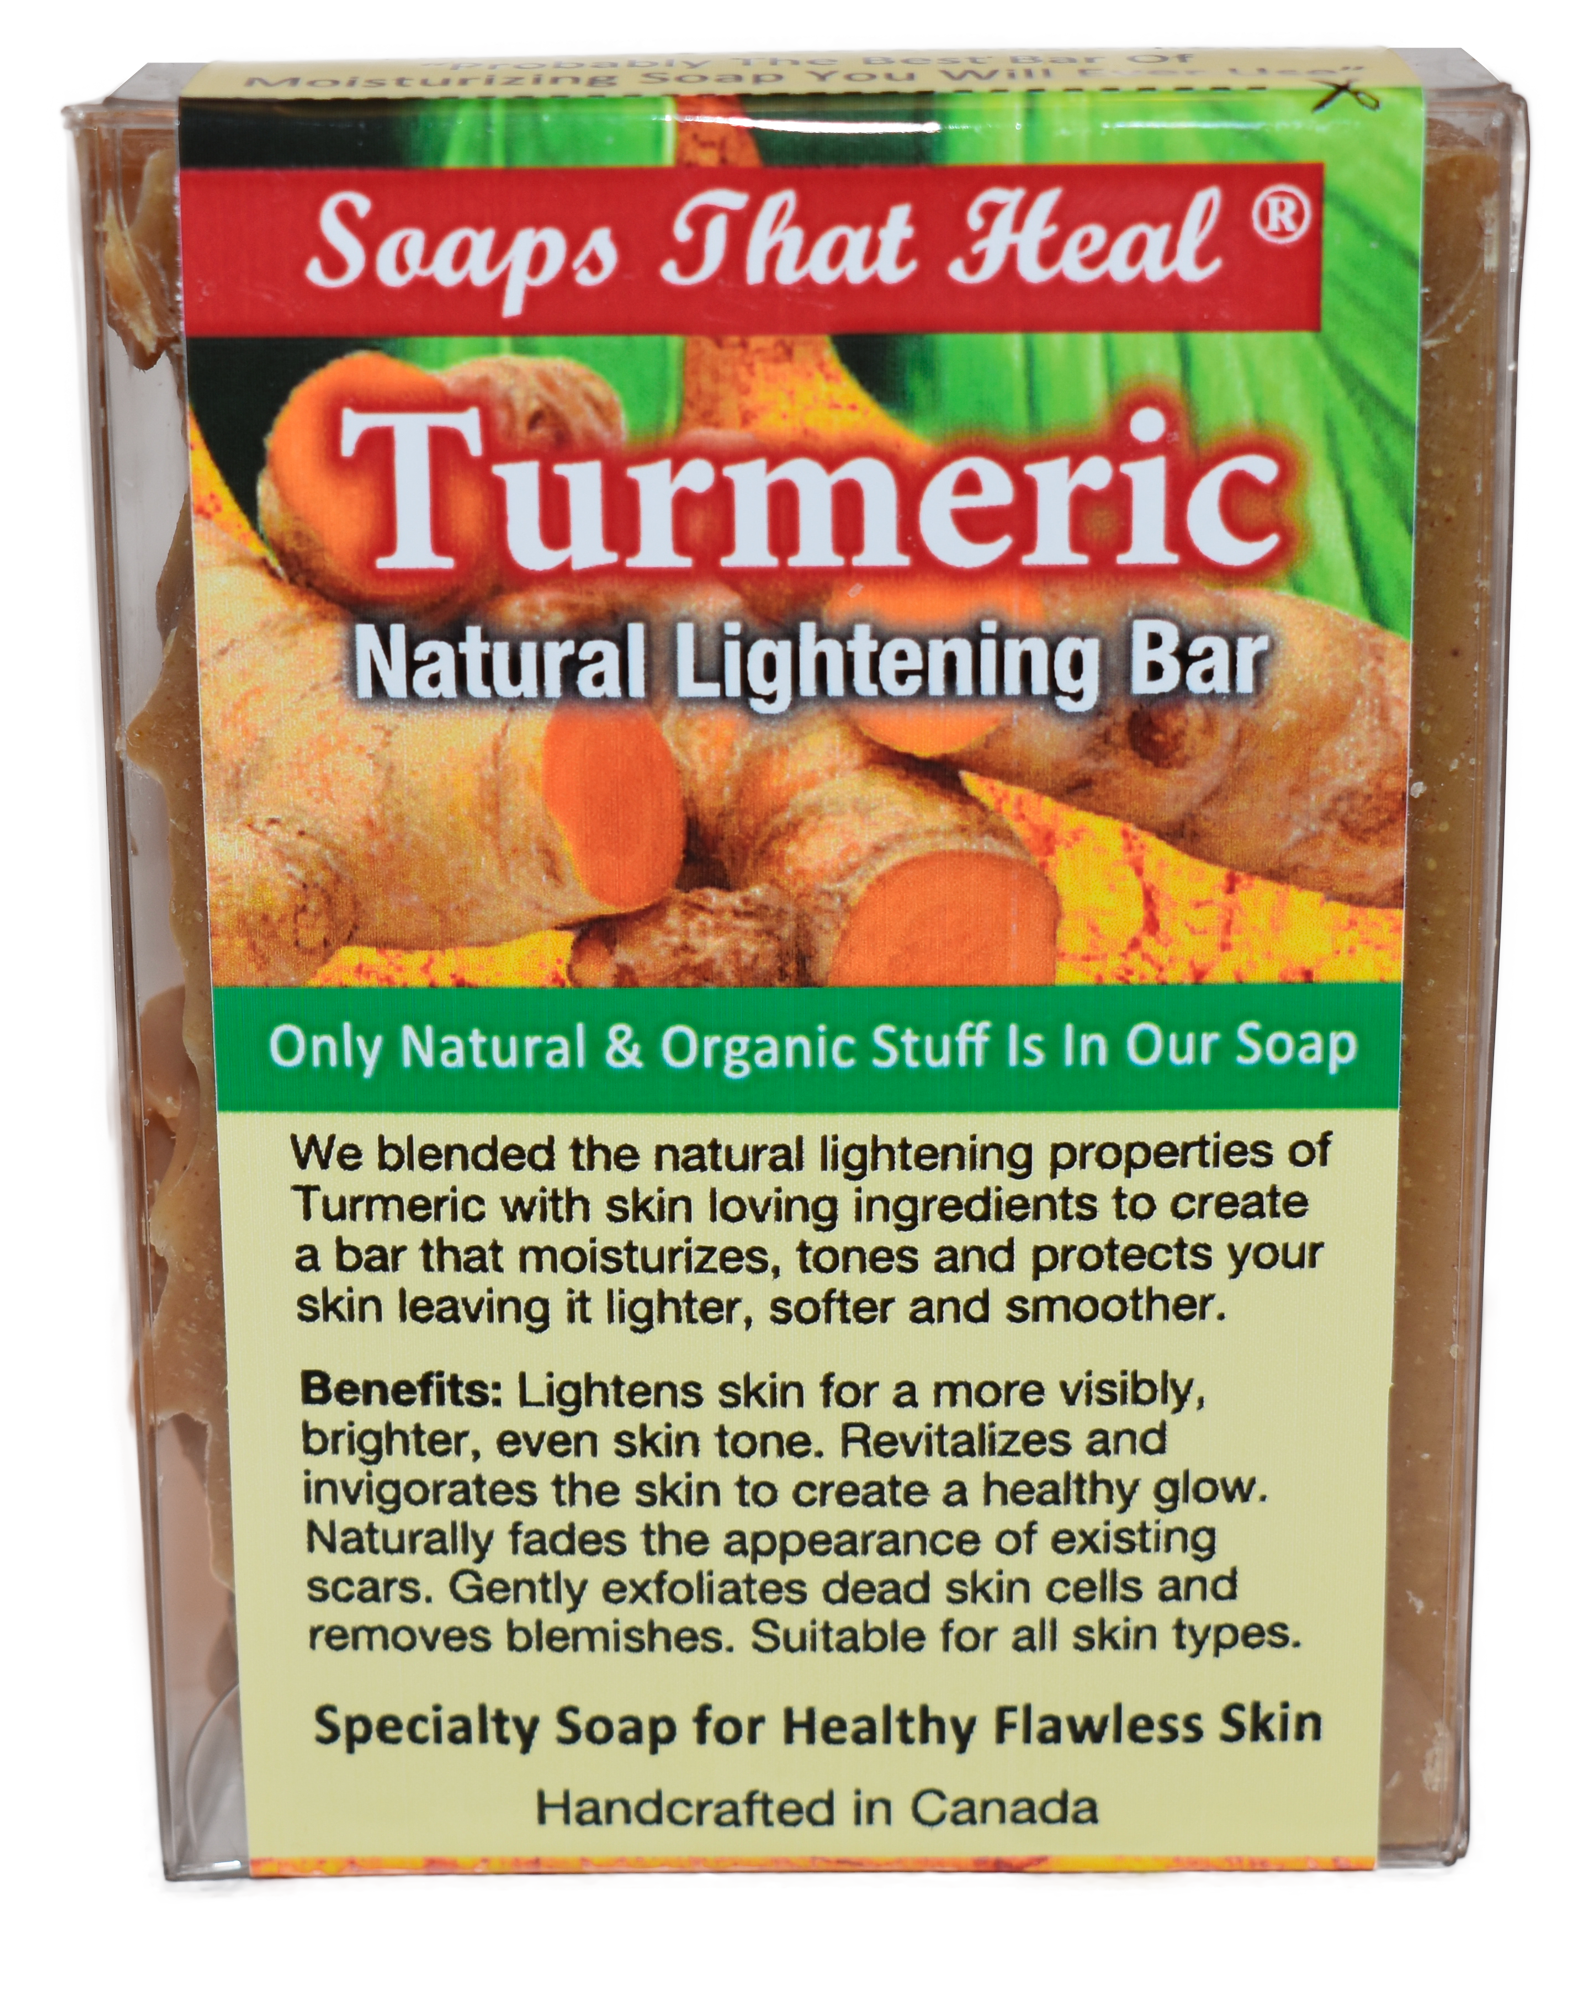 soaps that heal turmeric soap, natural lightening, natural alternatives to whitening creams,fade creams,bleaching creams,Remove Dark Spots and Acne,aspen kay,Healthy Skin, Natural Products Skin Care, problem skin,Turmeric Soap,the best body soap,saje,soaps that heal,healing soap, how to get rid of dark marks,dark spots,whitening soaps,lightening soaps,hyperpigmentation, best turmeric soap,oilblends,uncle benney's,soaps that heal